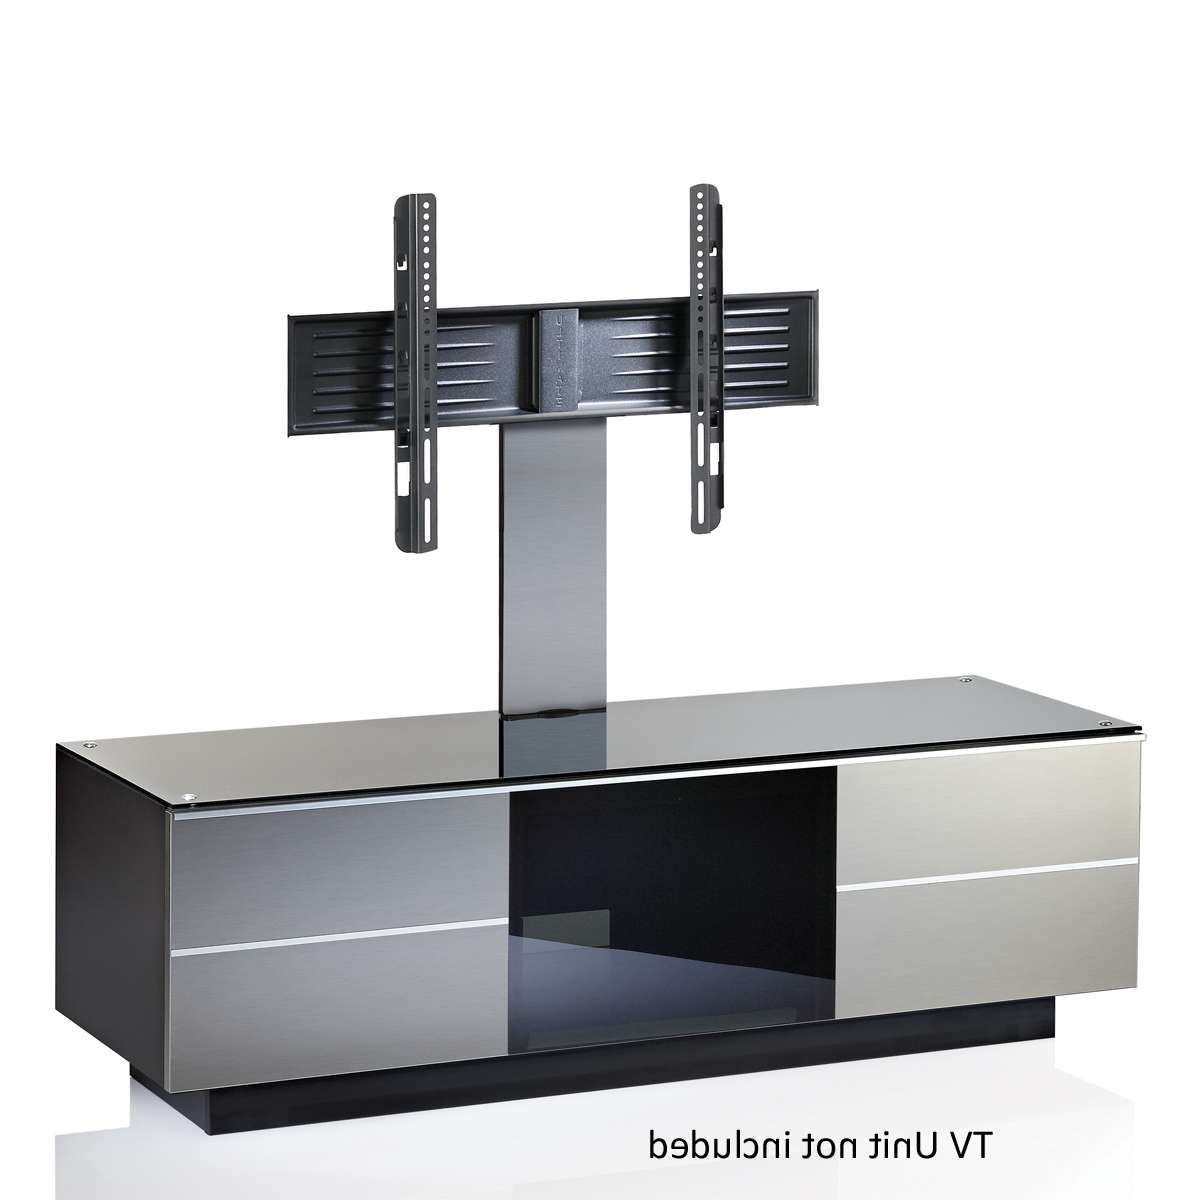 Inox G B 80 Inx Cantilever Tv Bracket,ukcf Ultimate,,uk Cf With Regard To Tv Stands Cantilever (View 8 of 15)